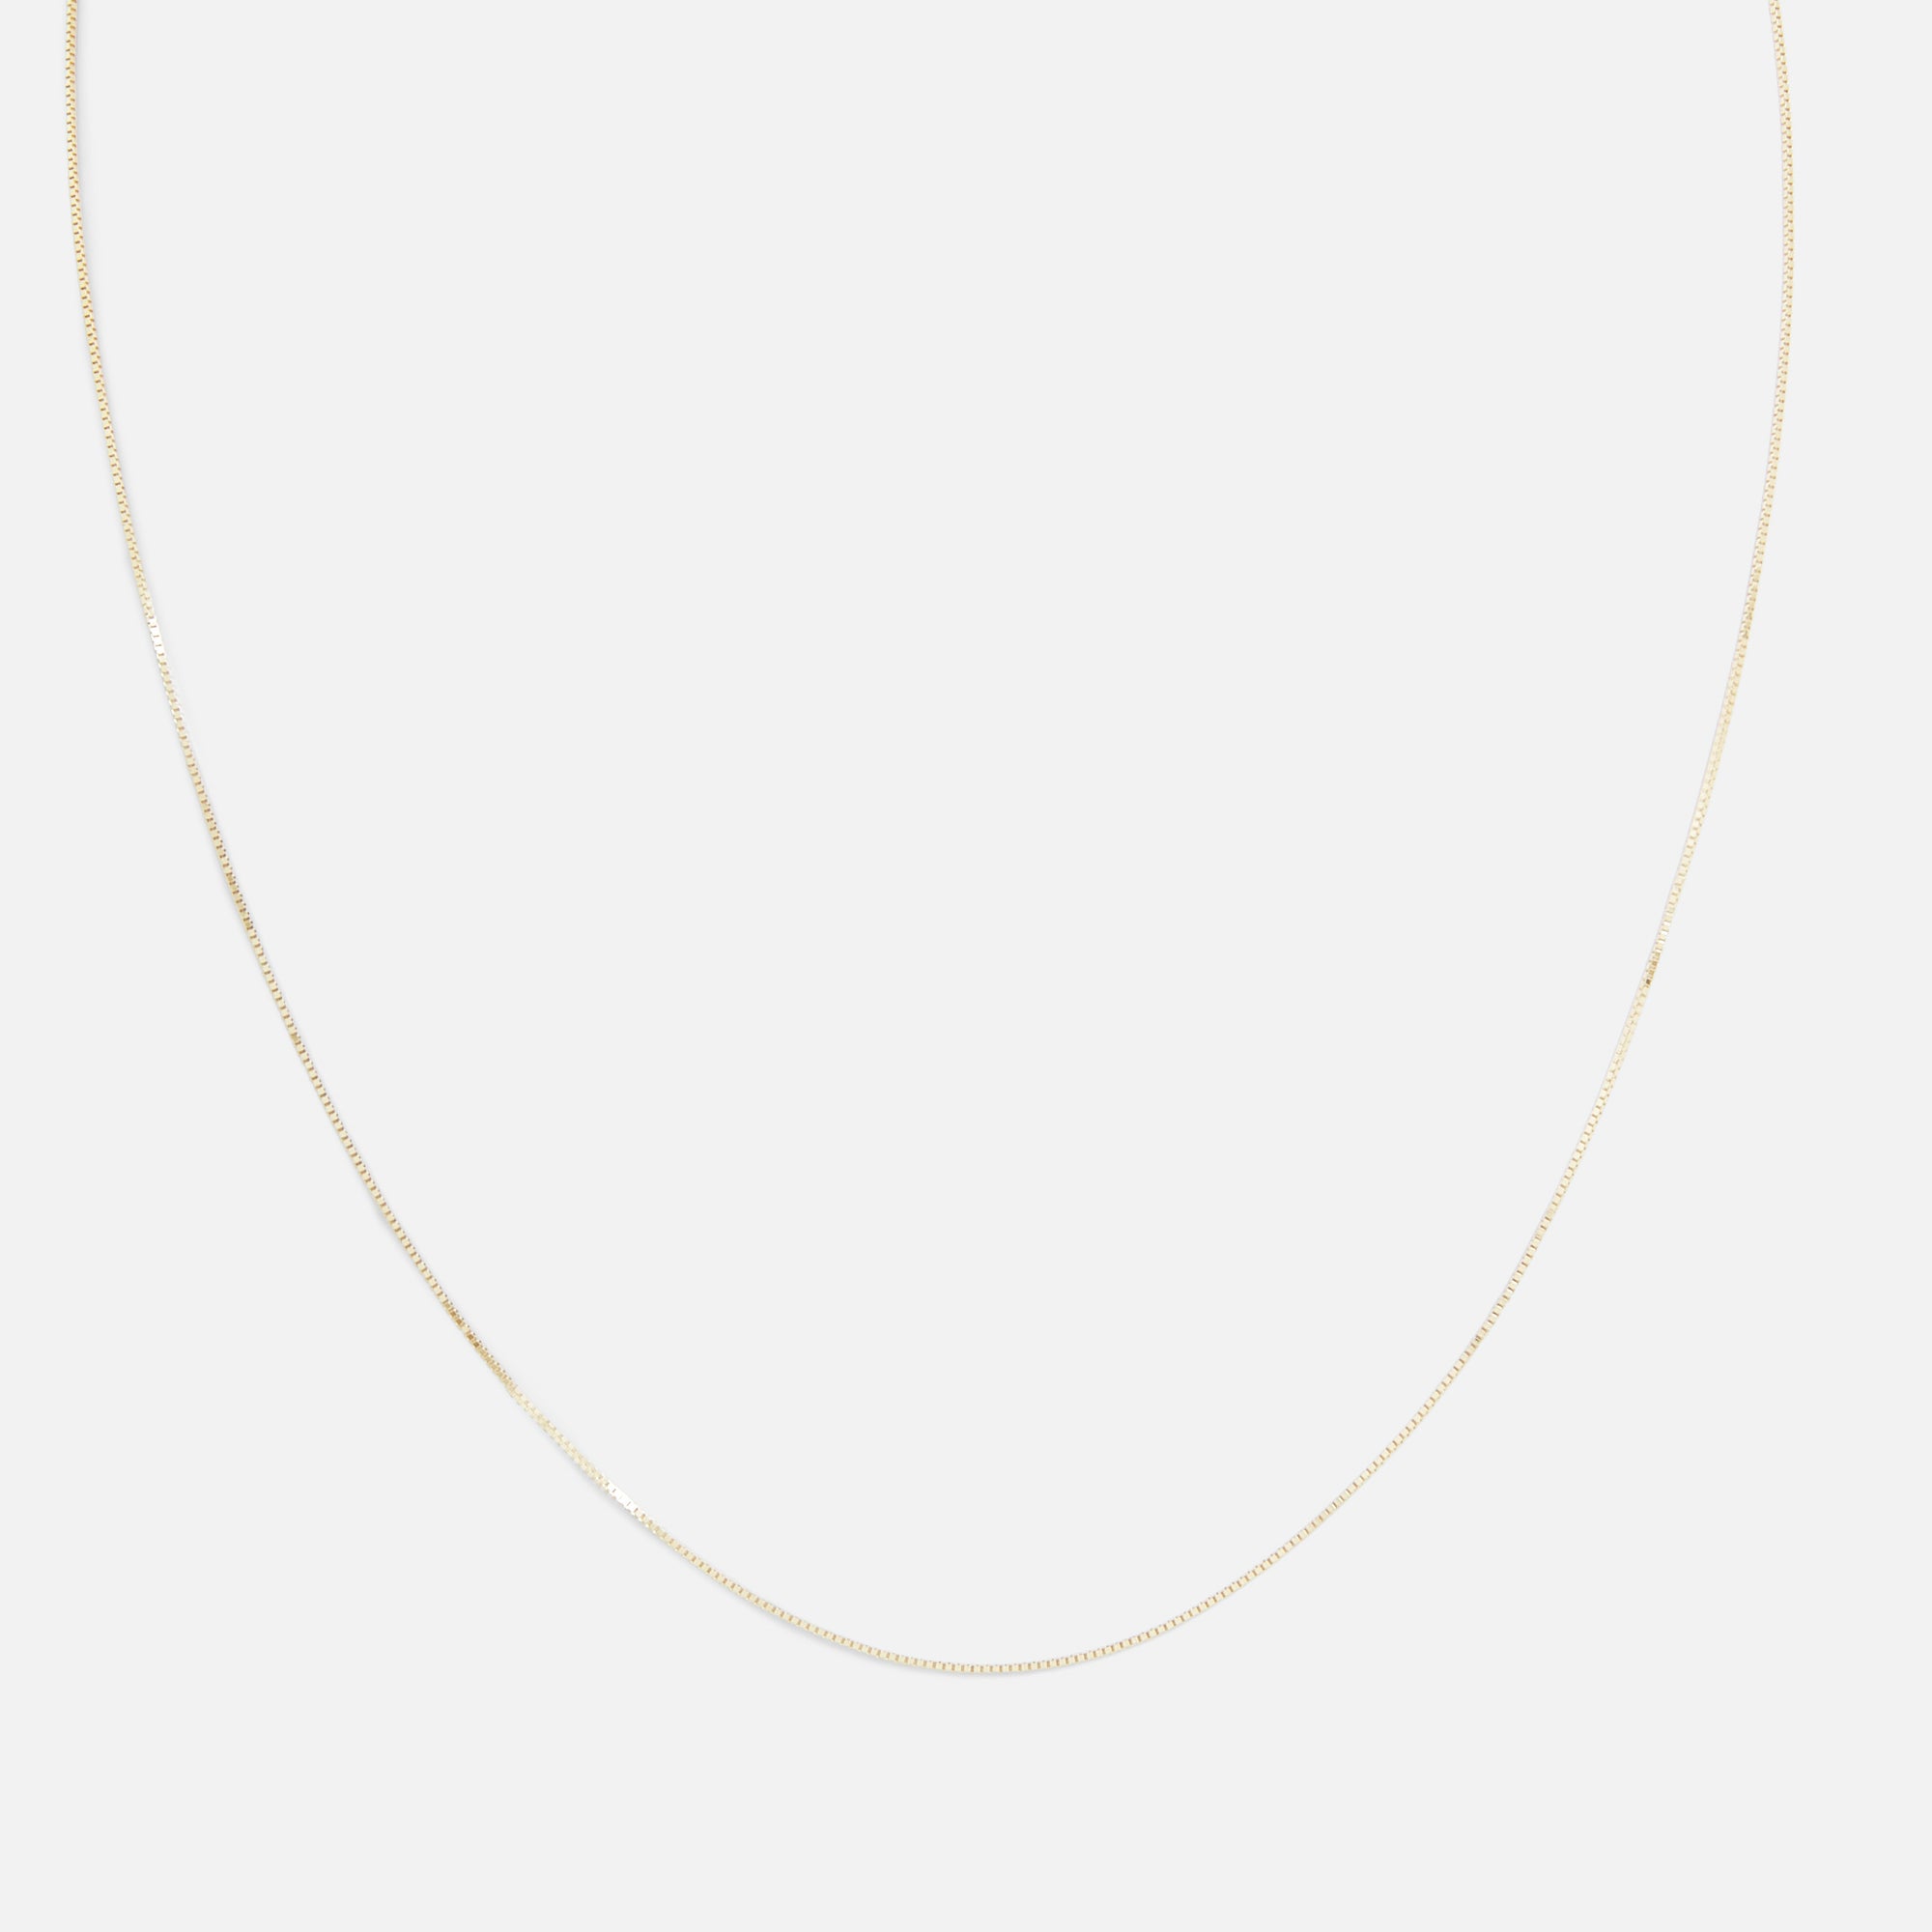 20’’ 10k yellow gold square chain 